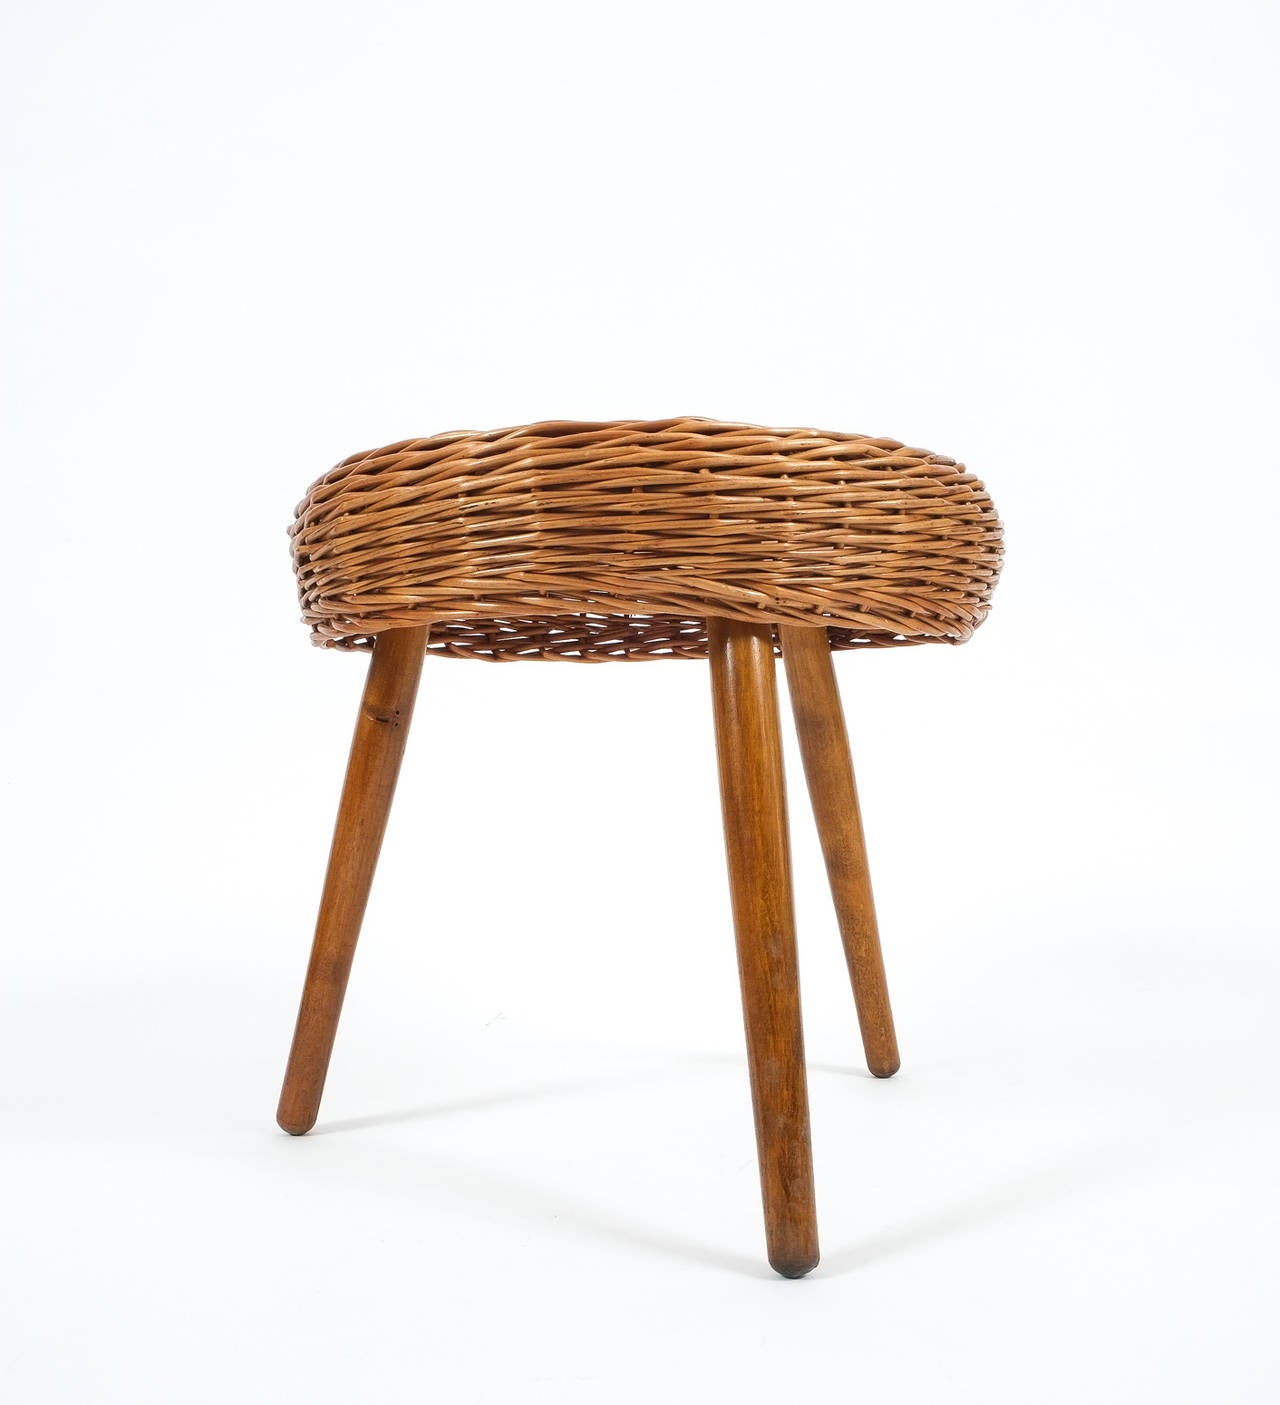 Nice three-legged wicker stool by Tony Paul, 1950 in very good condition featuring a rattan seat and walnut legs.

Shipping is complimentary.